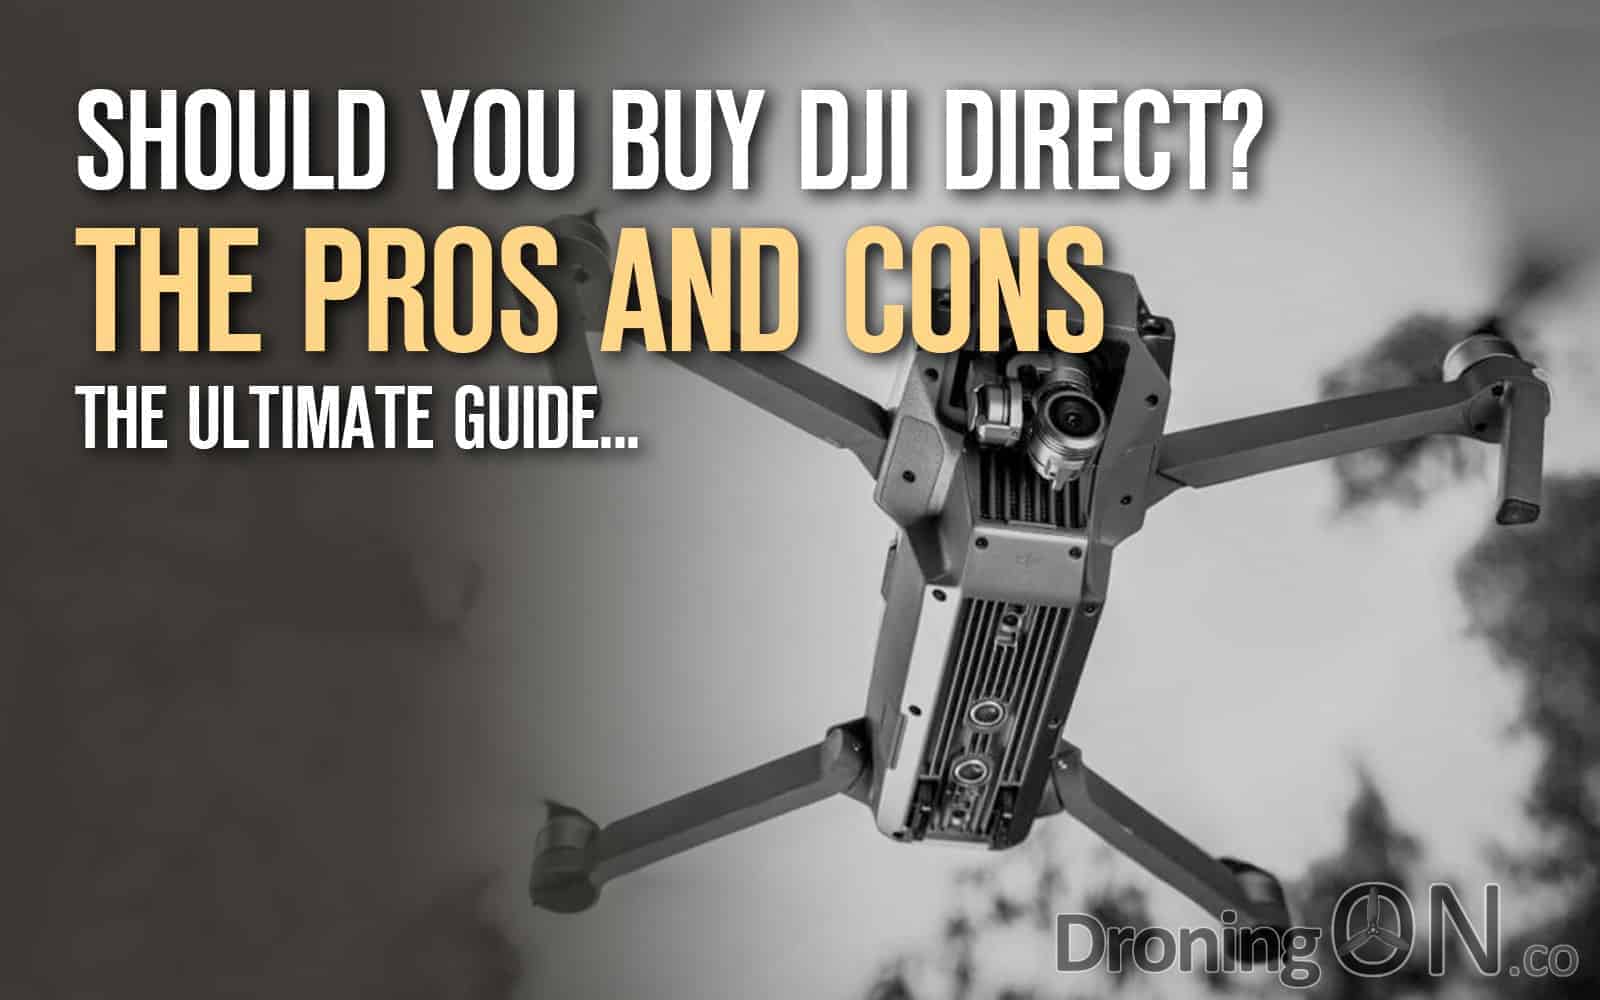 Should you buy direct from DJI or from one of the cheaper online retailers?